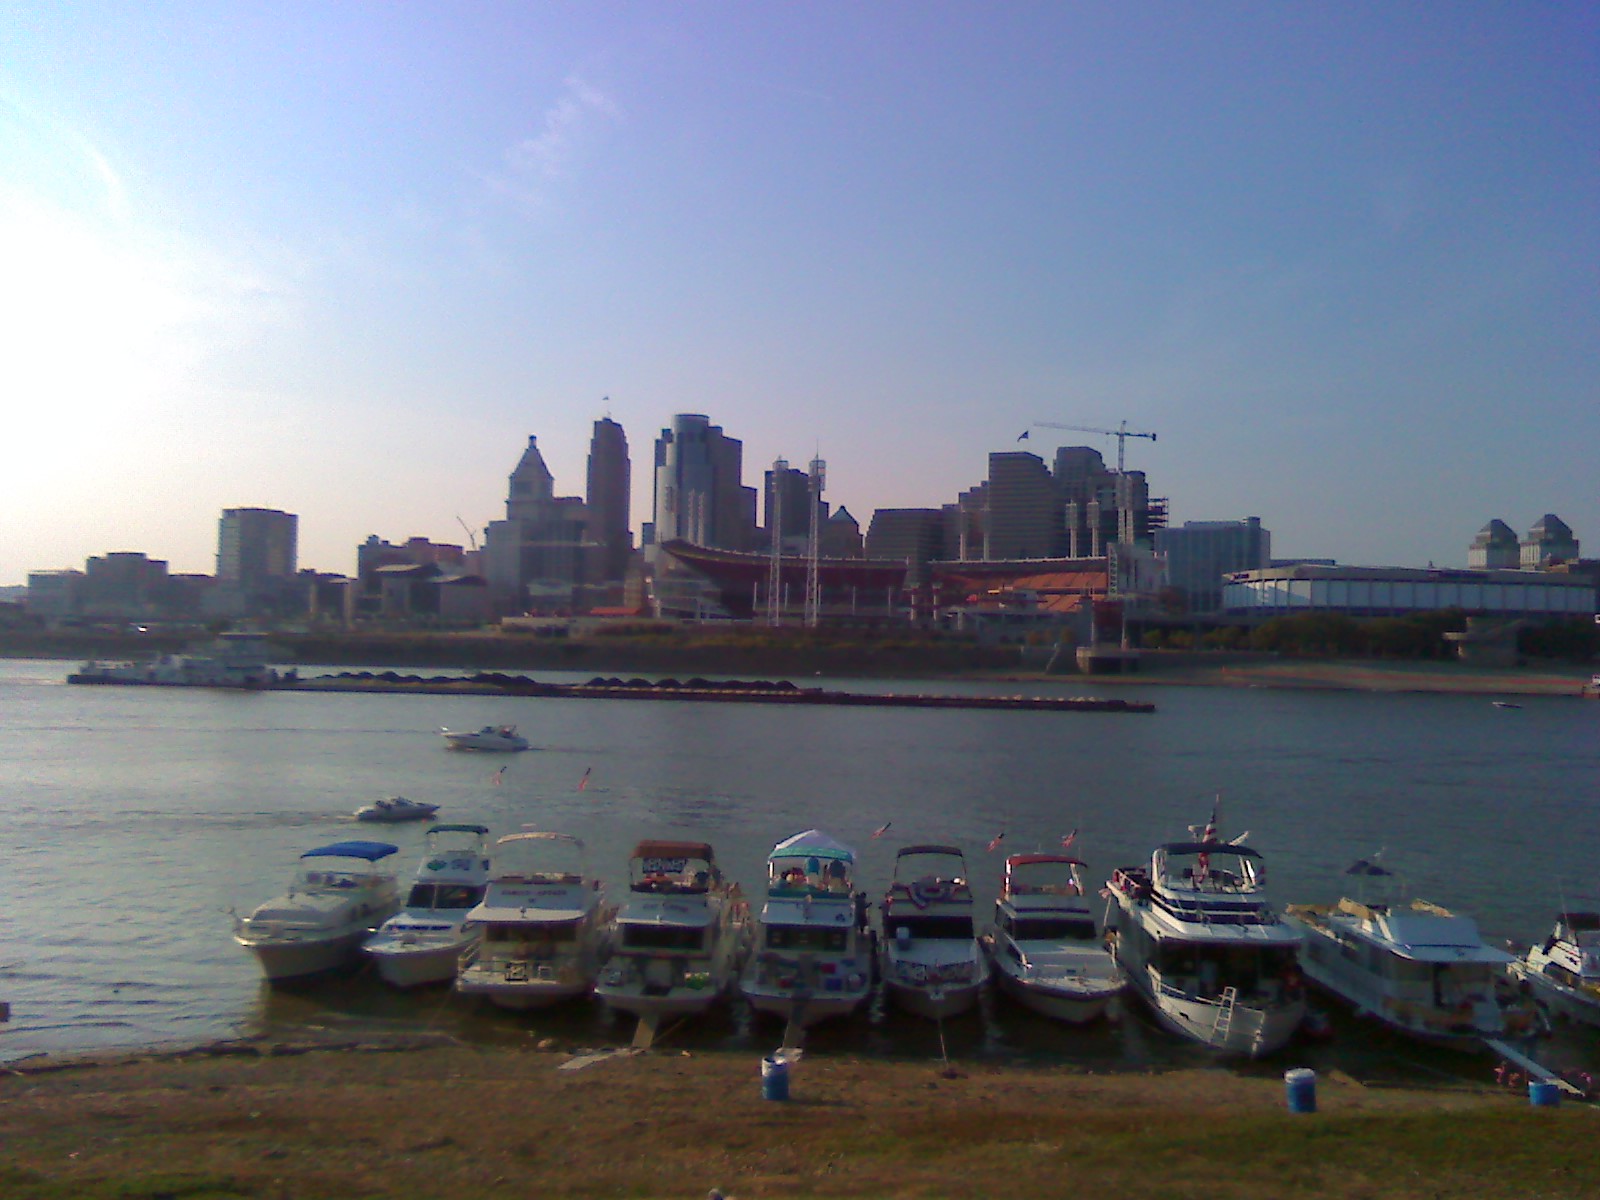 Sitting on the shoreline waiting to board the Belle of Cincinnati